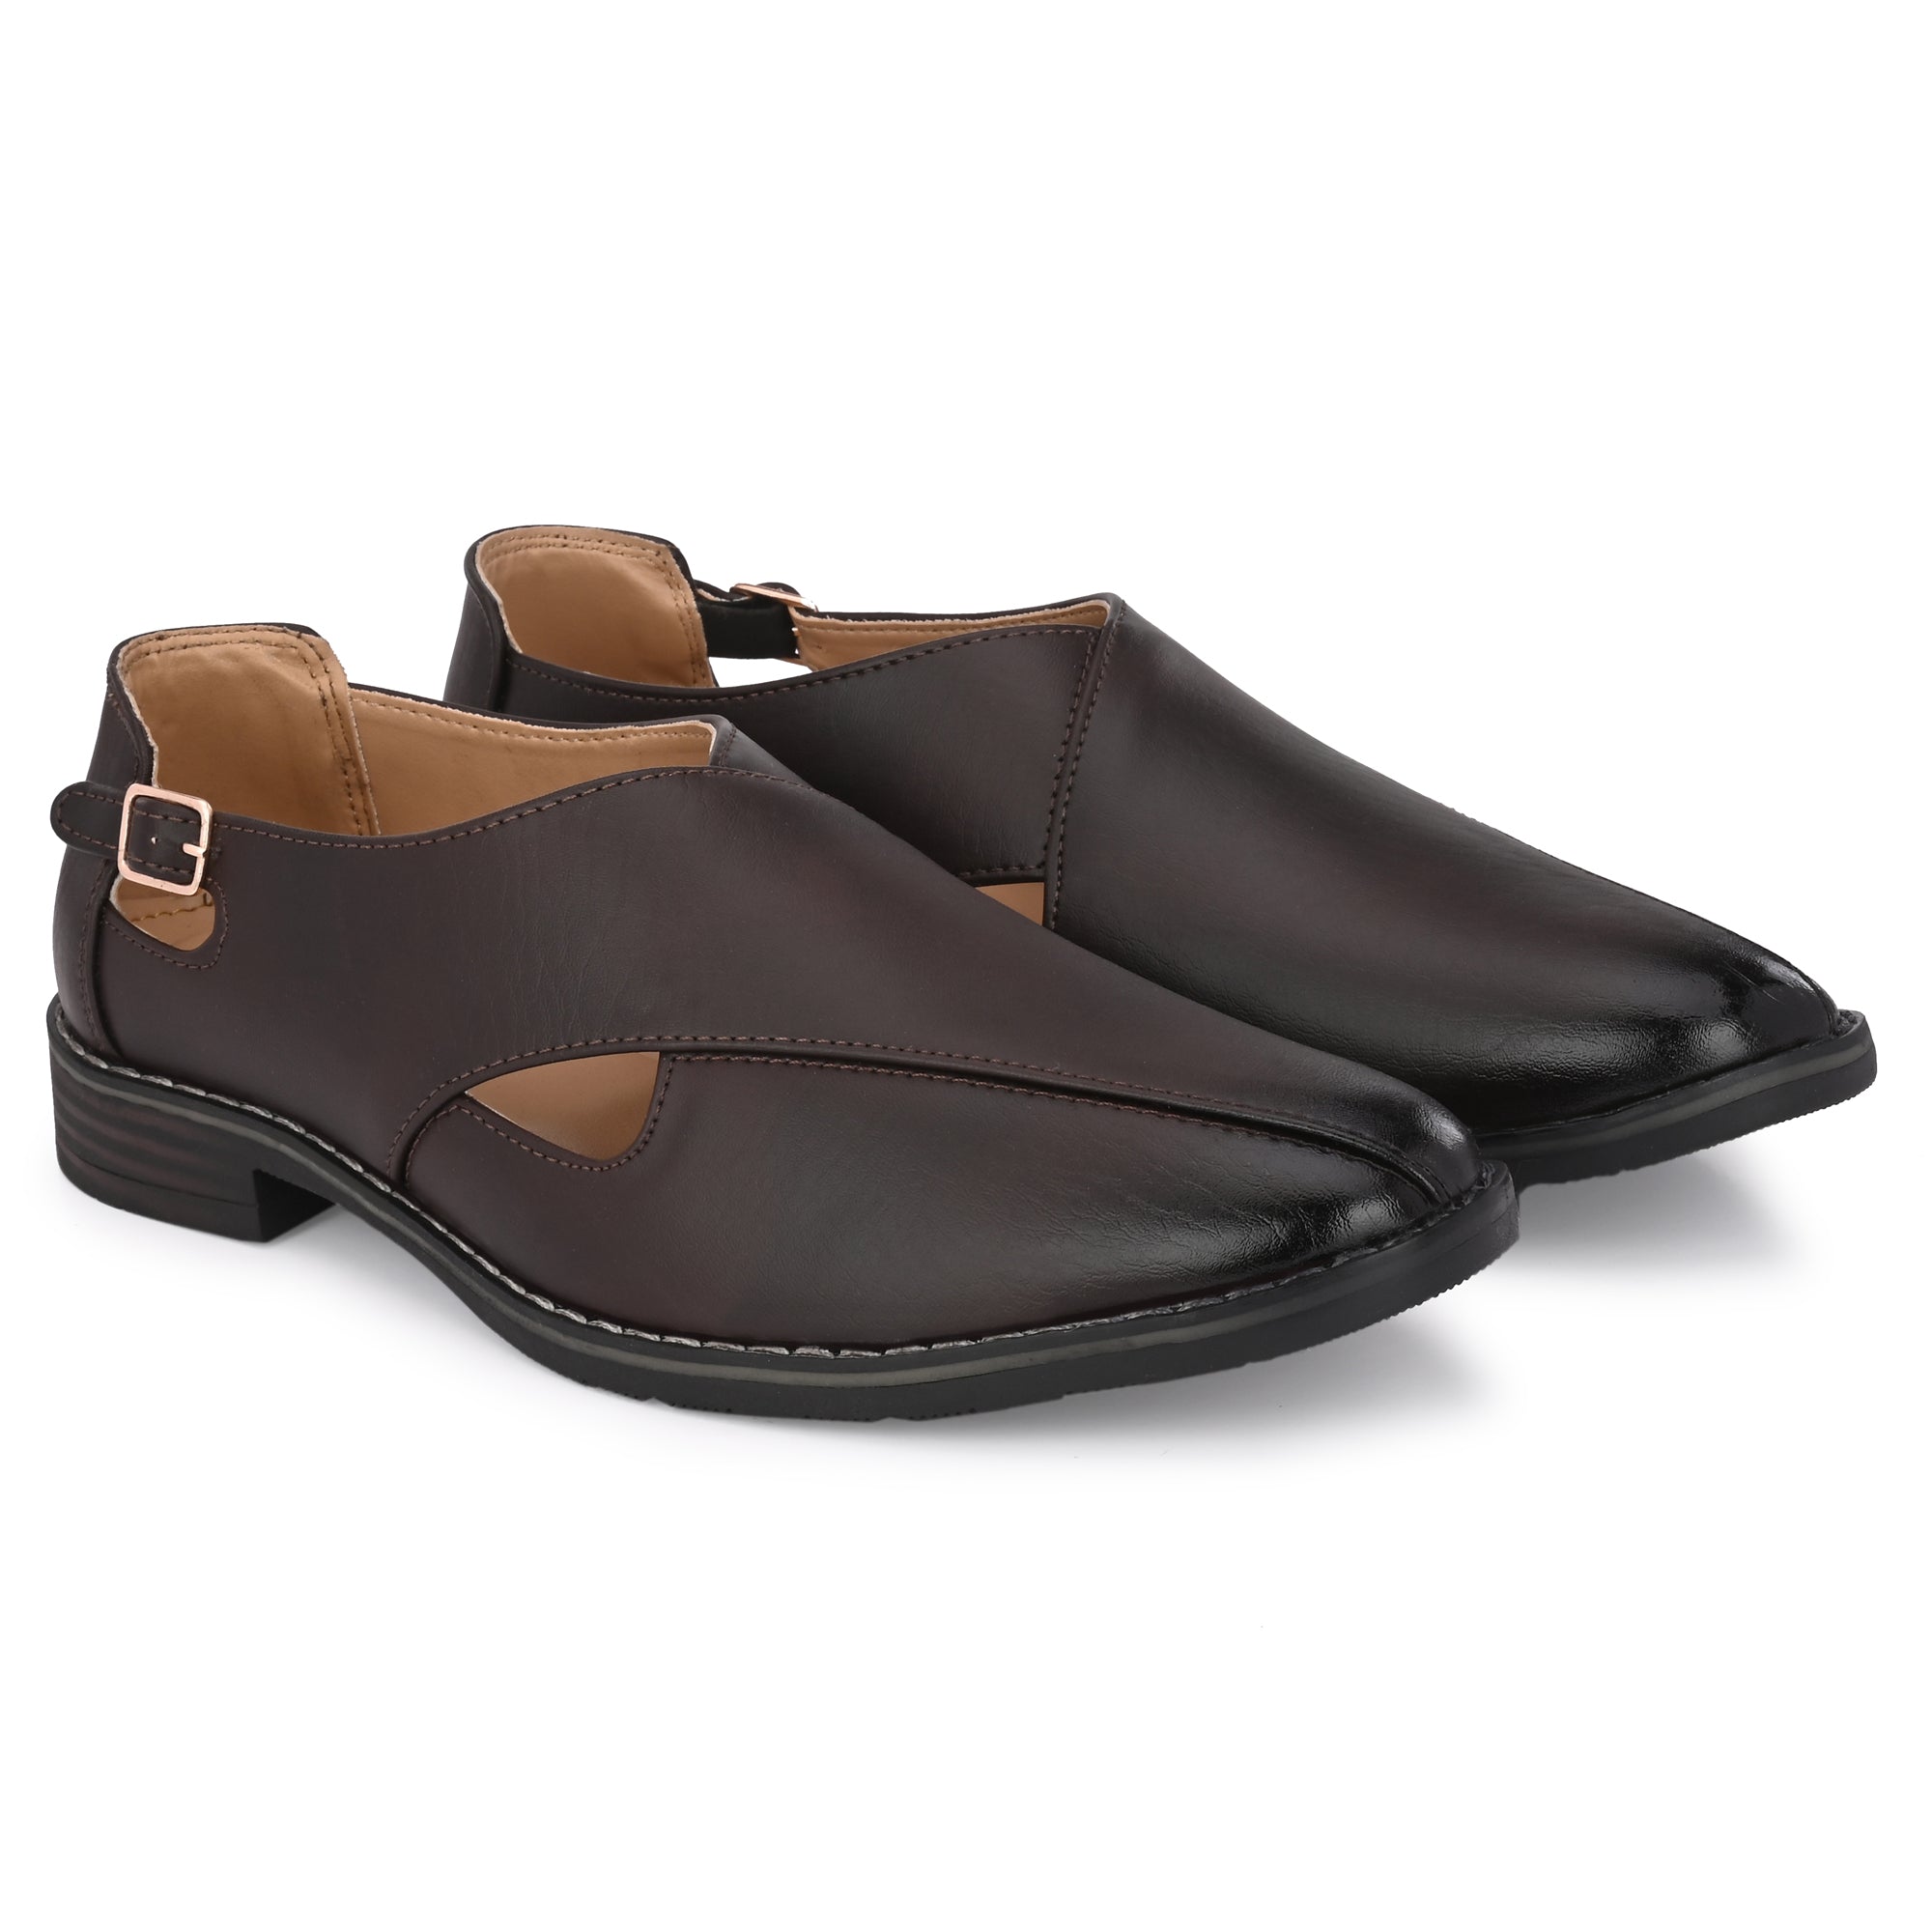 Attitudist Handcrafted Criss Cross Matte Brown Formal Loafer Peshawari Shoes With A Buckle For Men MTOBSF 1694600182965